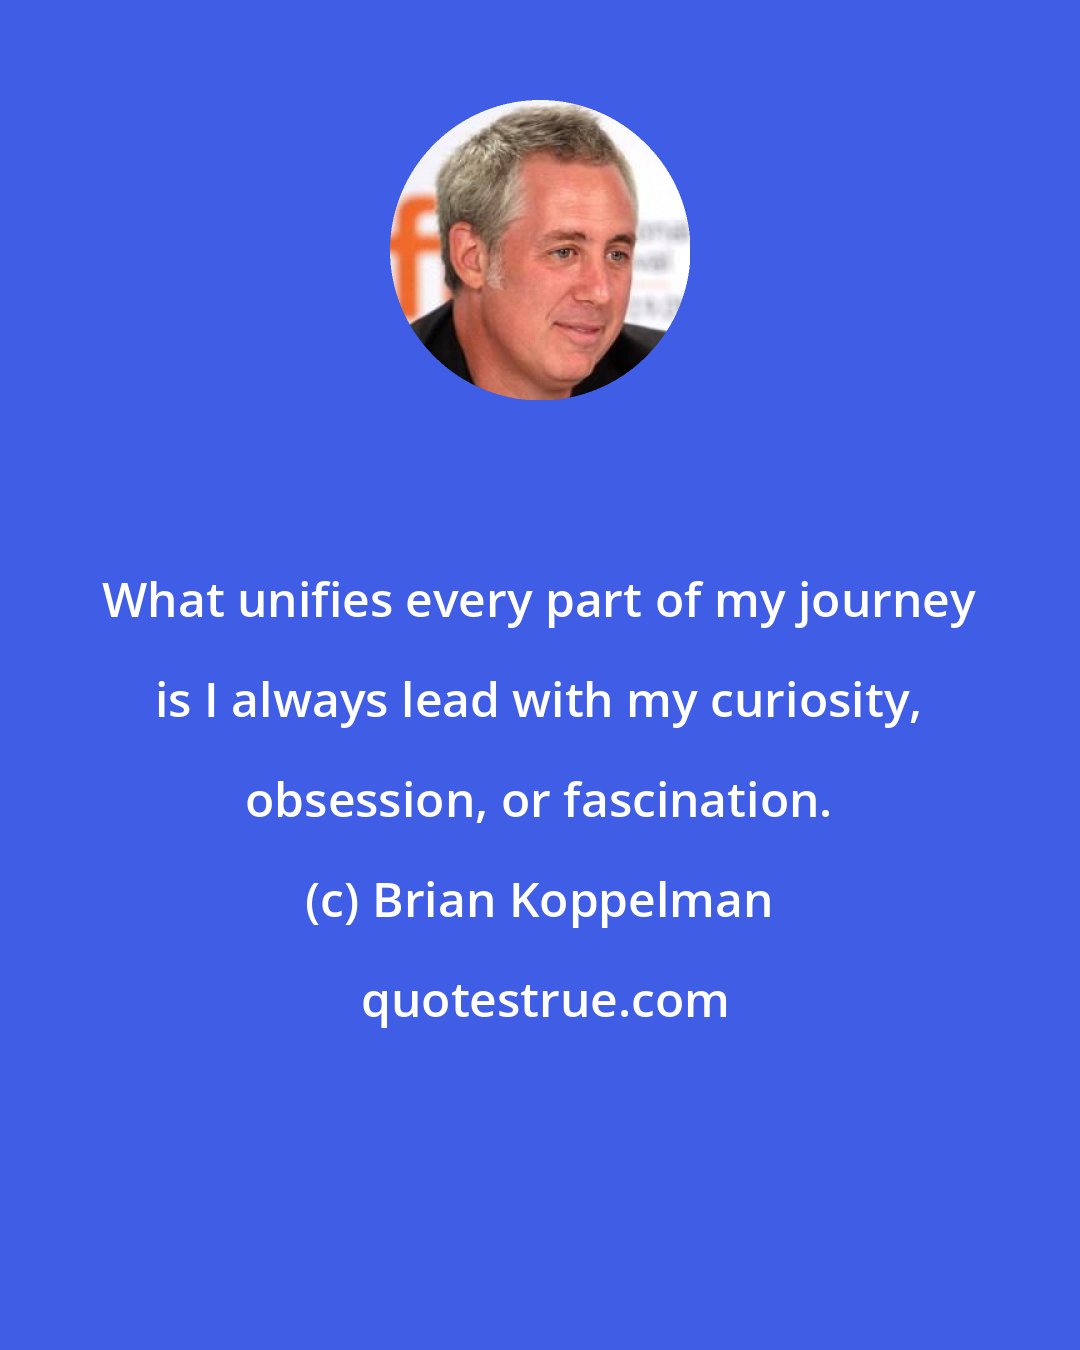 Brian Koppelman: What unifies every part of my journey is I always lead with my curiosity, obsession, or fascination.